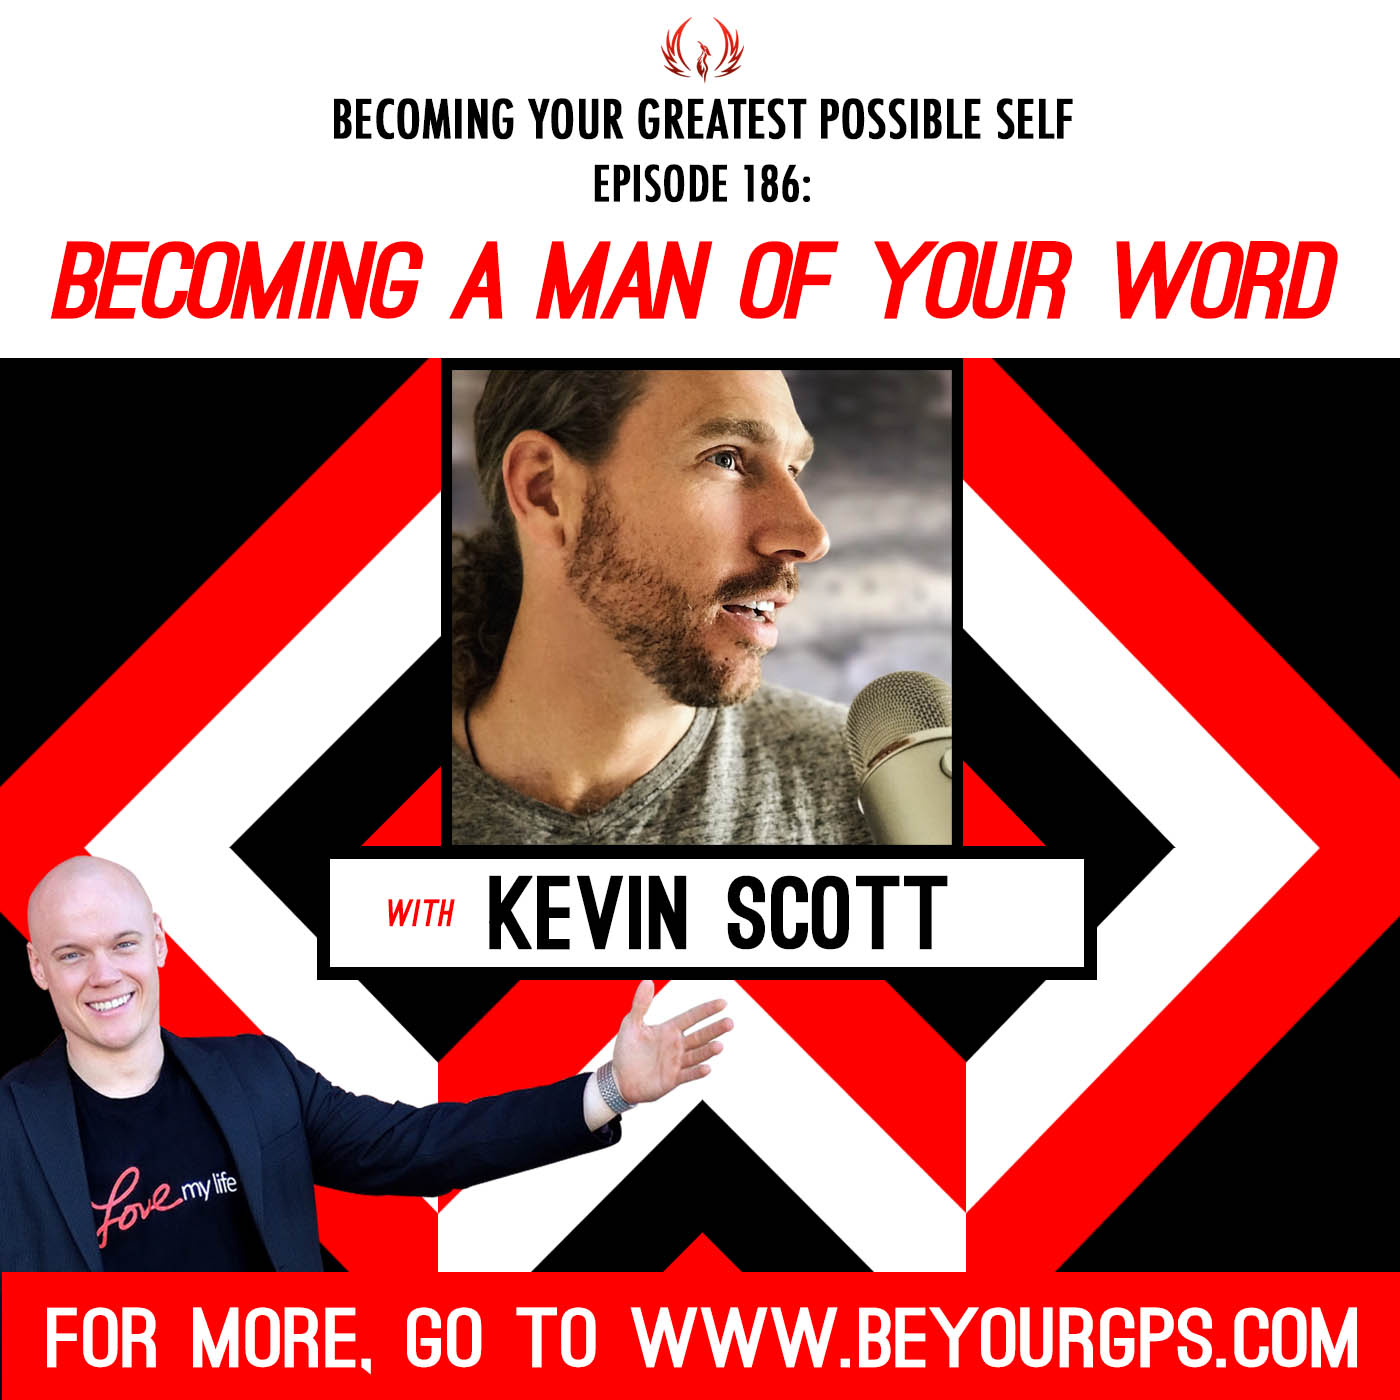 Becoming a Man of Your Word with Kevin Scott